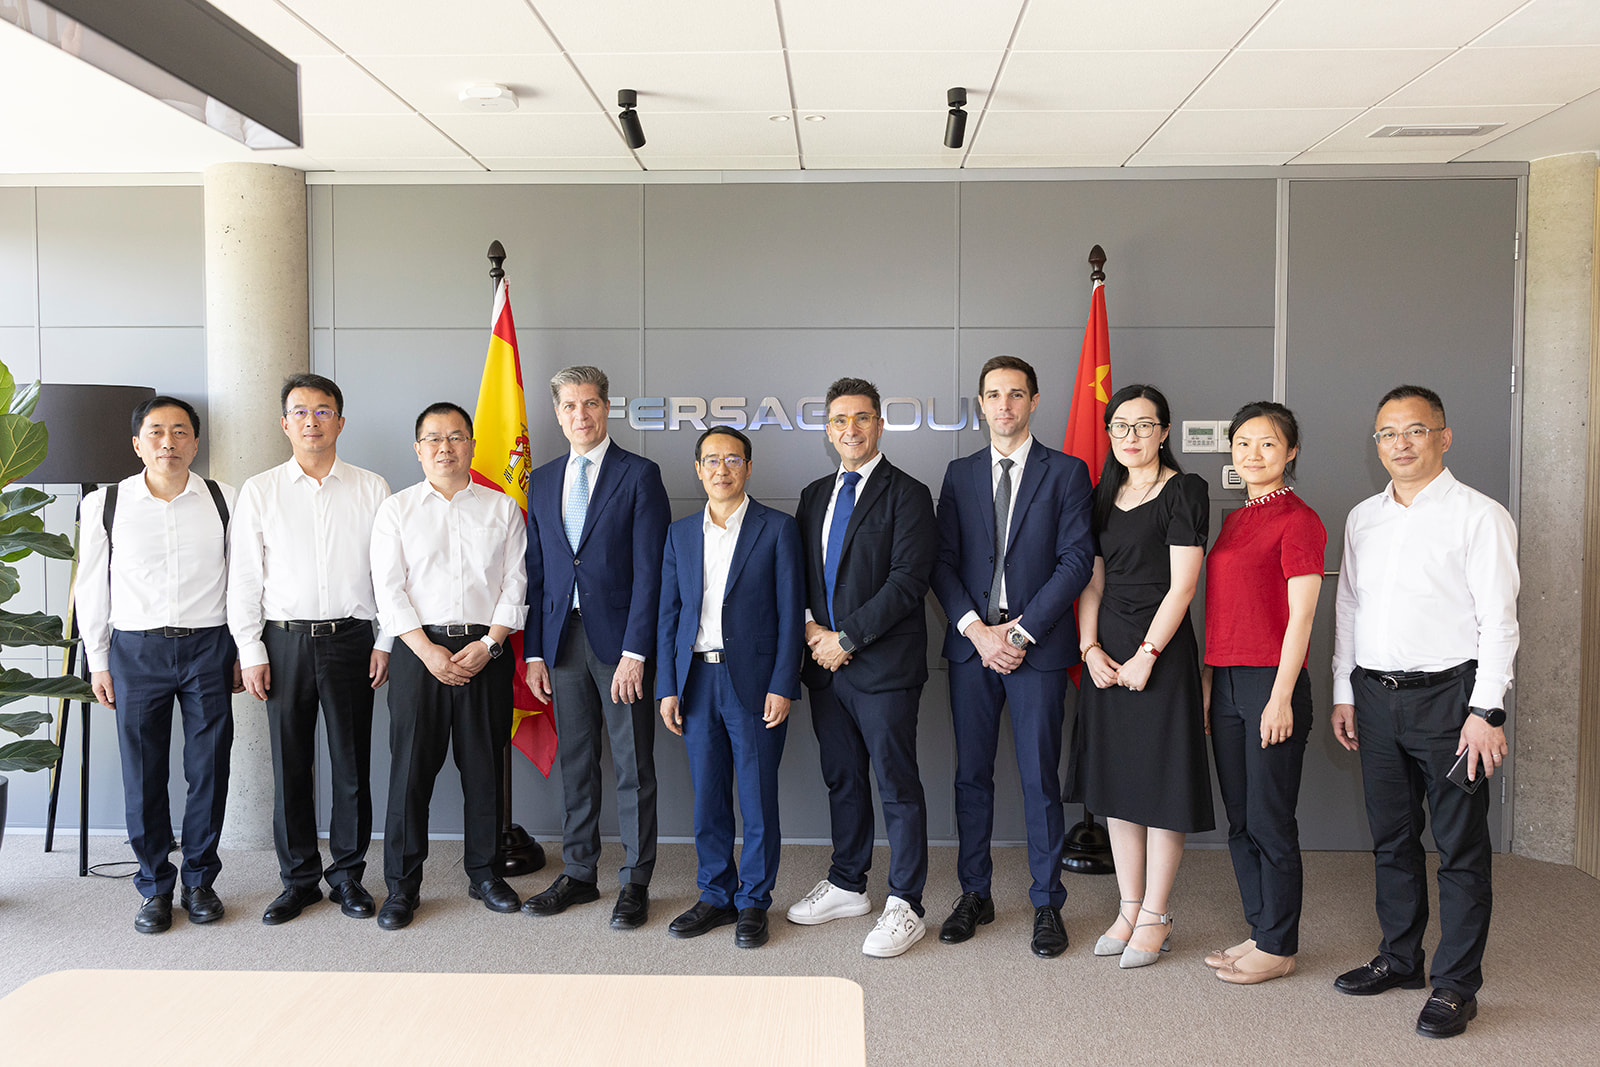 The Government of the Chinese city of Jiaxing visited on June 25th and 26th the headquarters of Fersa Group in Zaragoza. This visit arose from the signing of a collaboration agreement between the Chinese institution and the Spanish company and has served to promote cooperation and trade relations with the city of Zaragoza and other local companies.